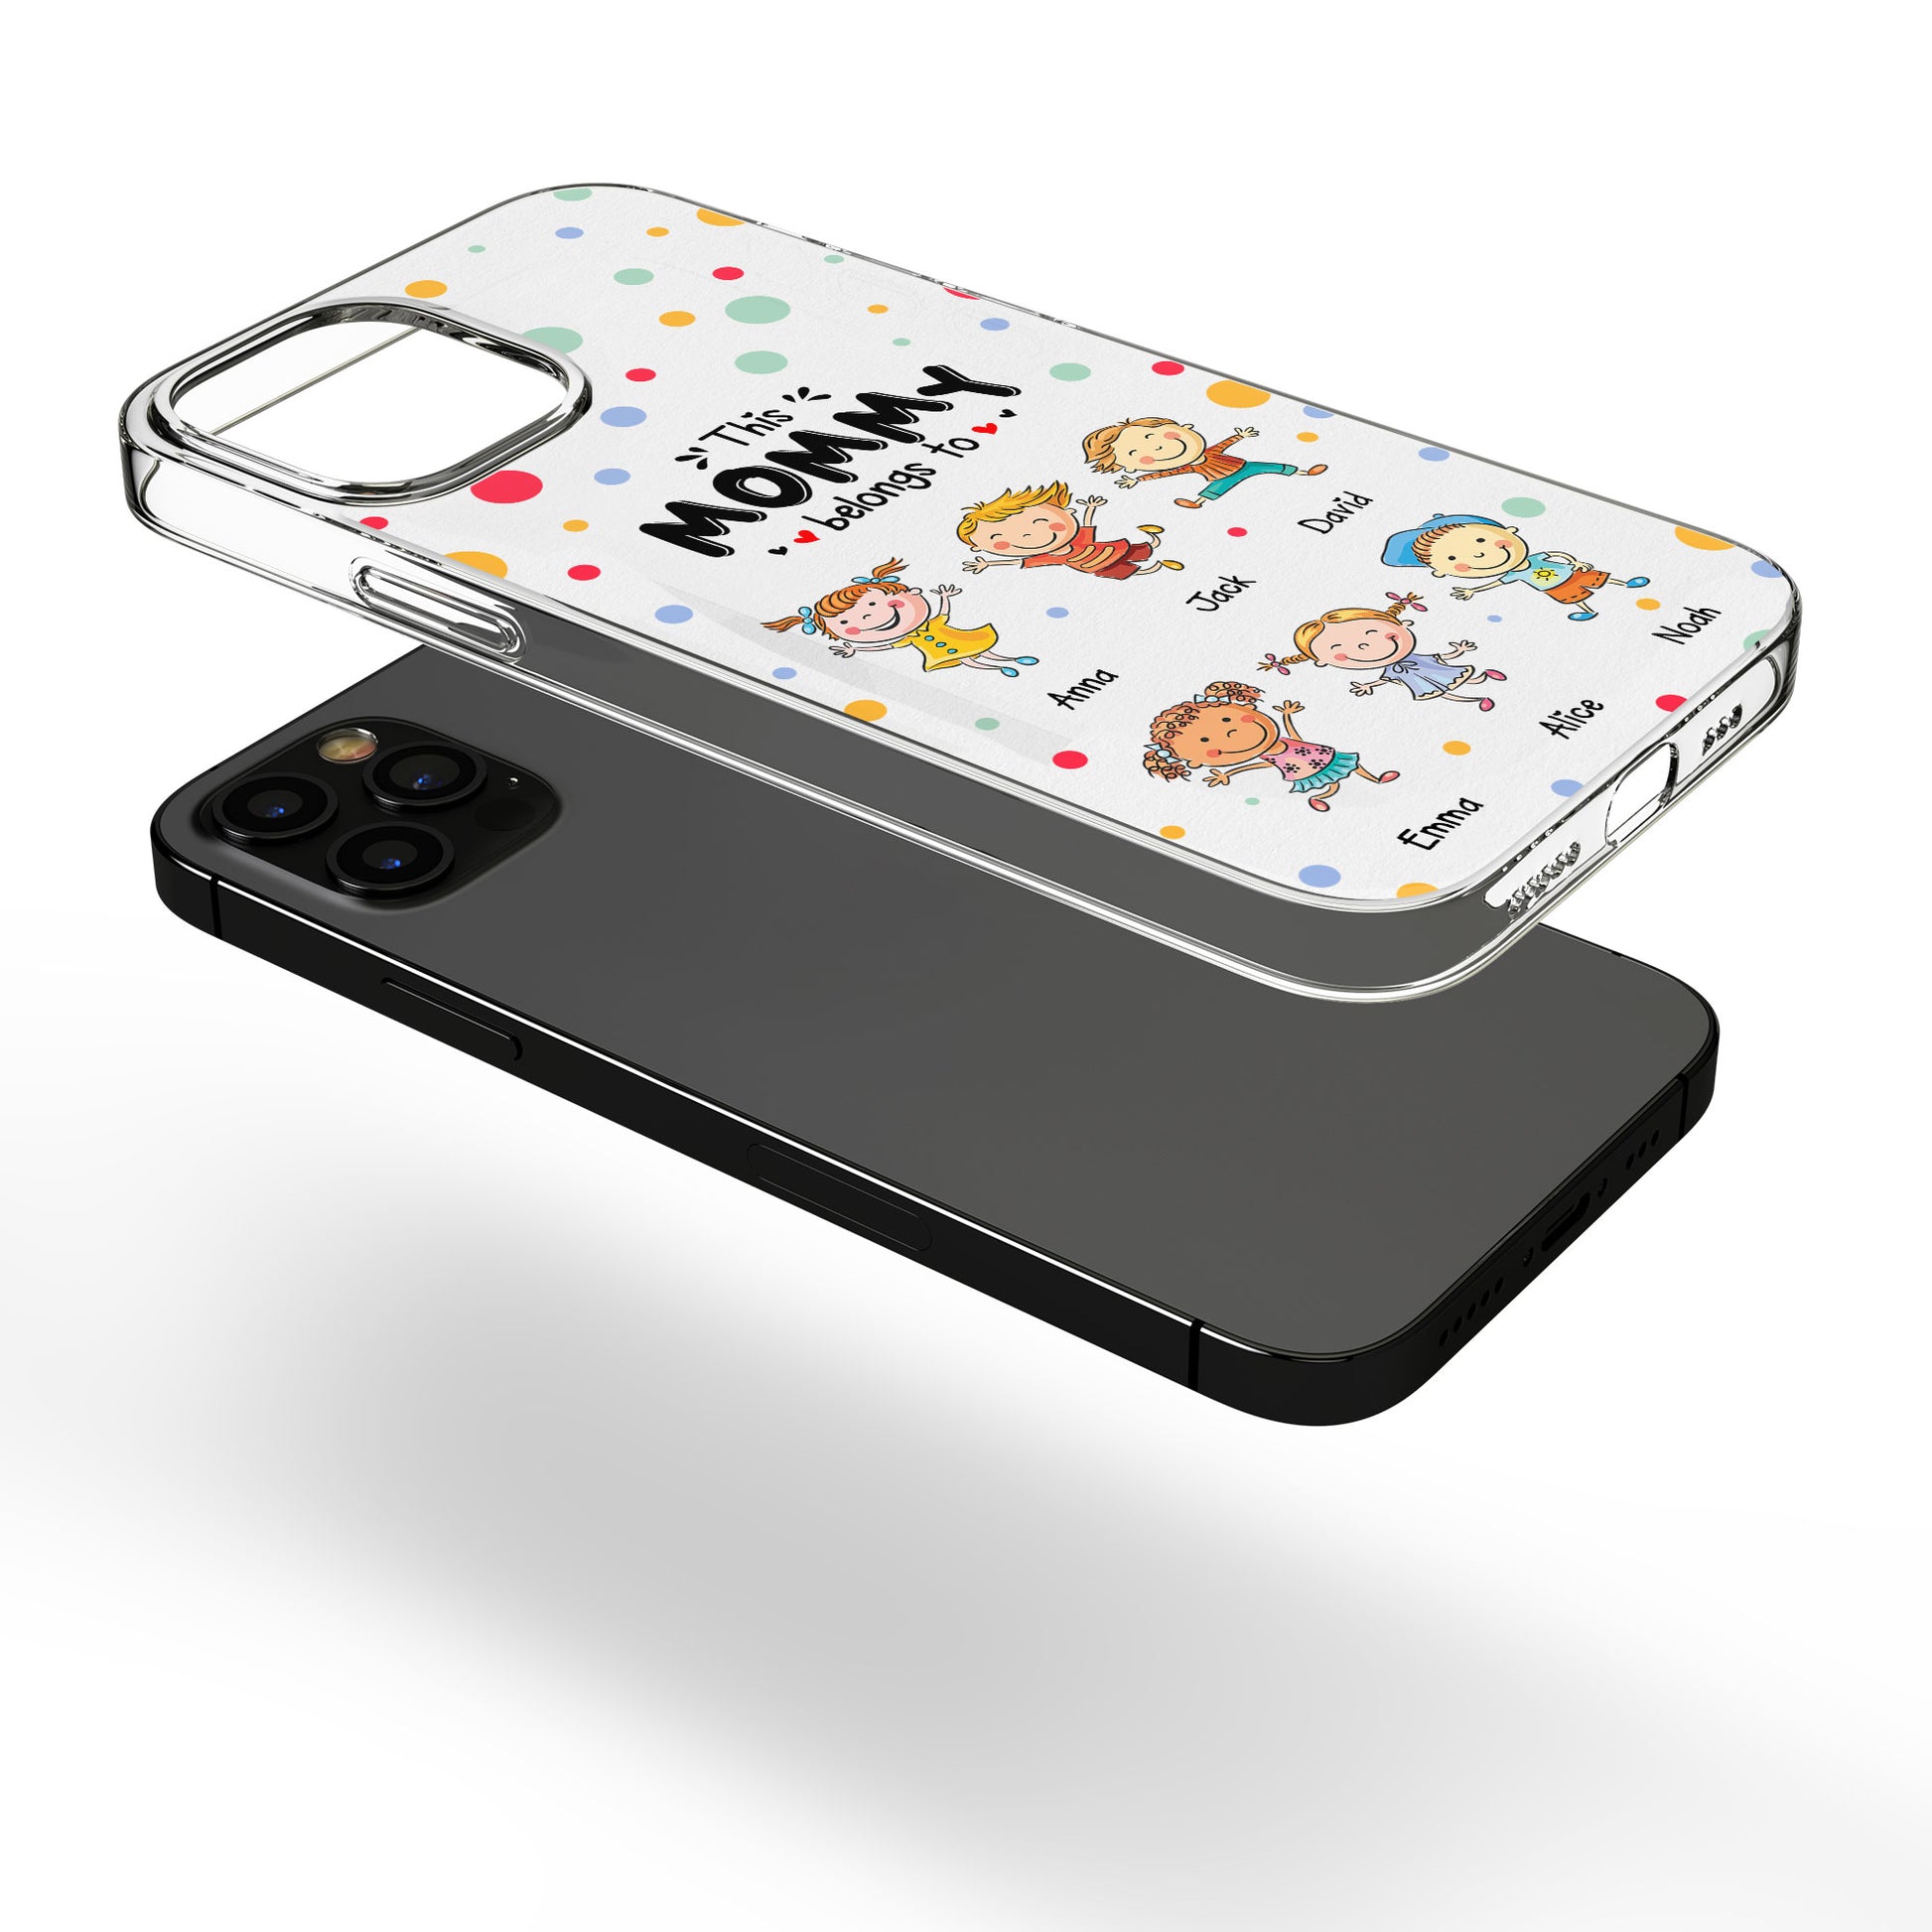 LV Snoopy iPhone XR Case